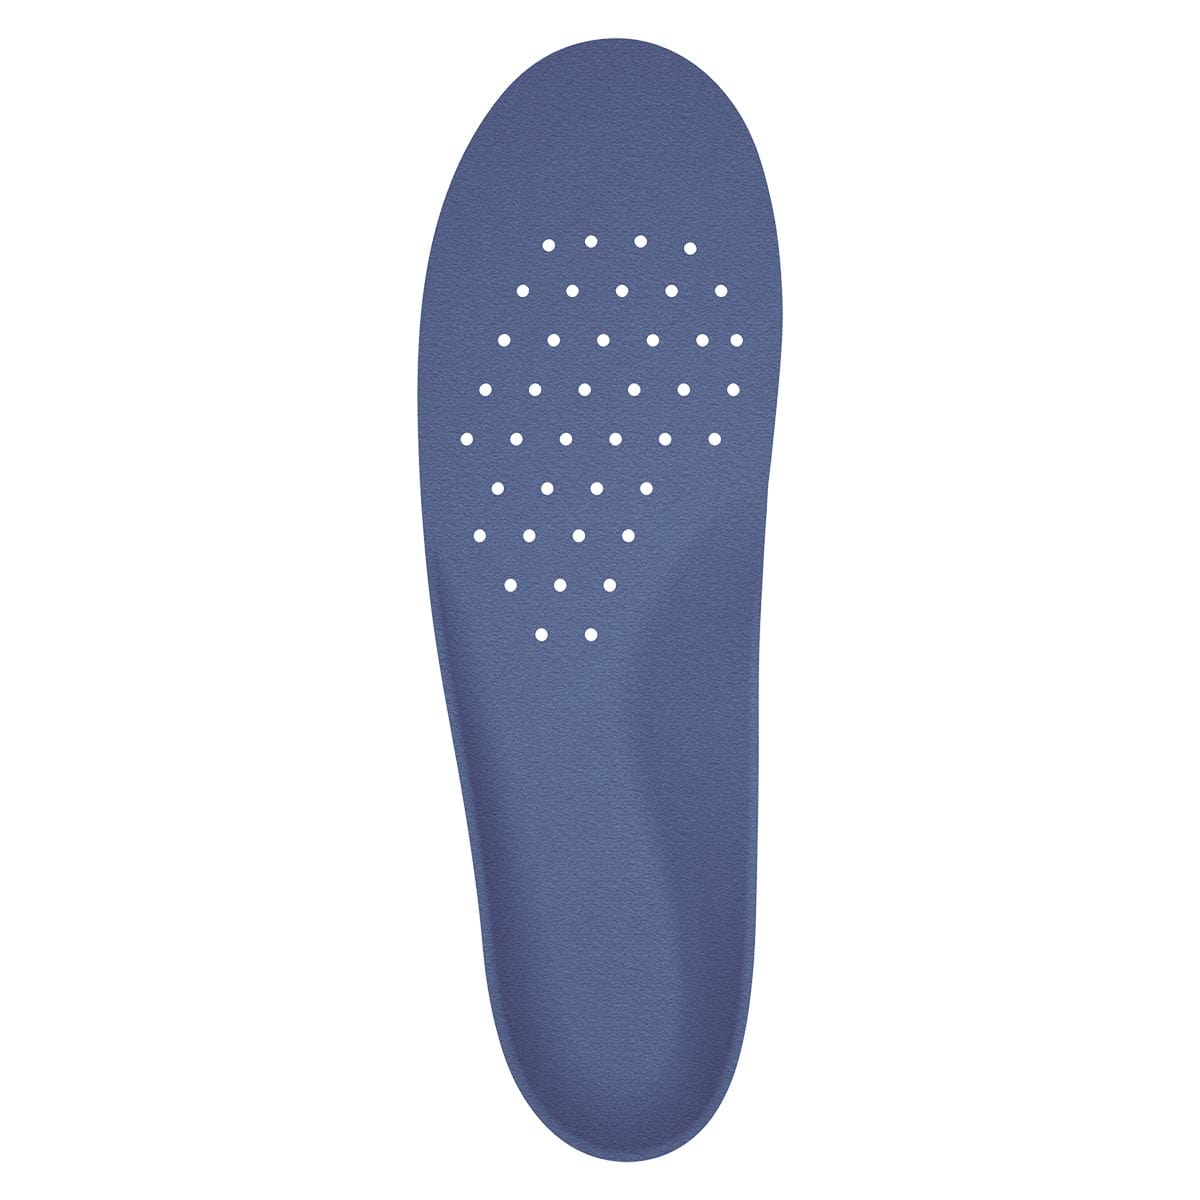 Dr. Scholl's®  Women's Pain Relief Orthotics for Extra Support Insoles